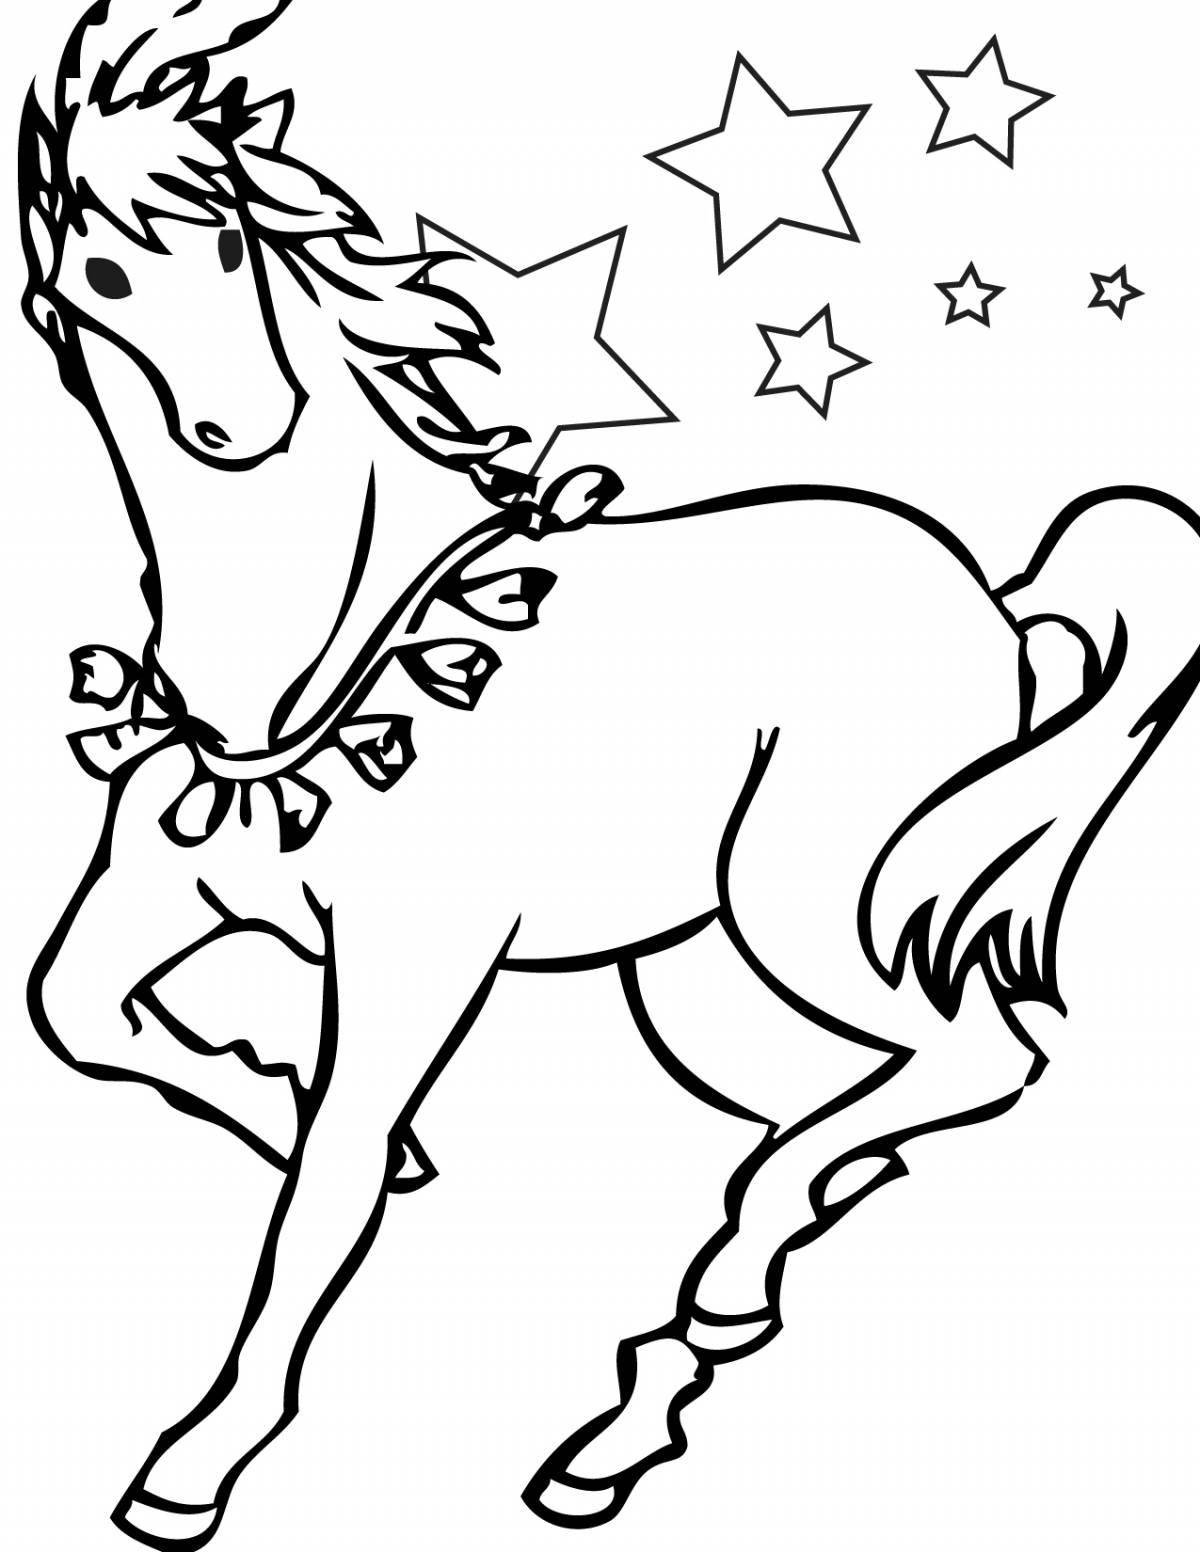 Glitter horse coloring book for children 6-7 years old